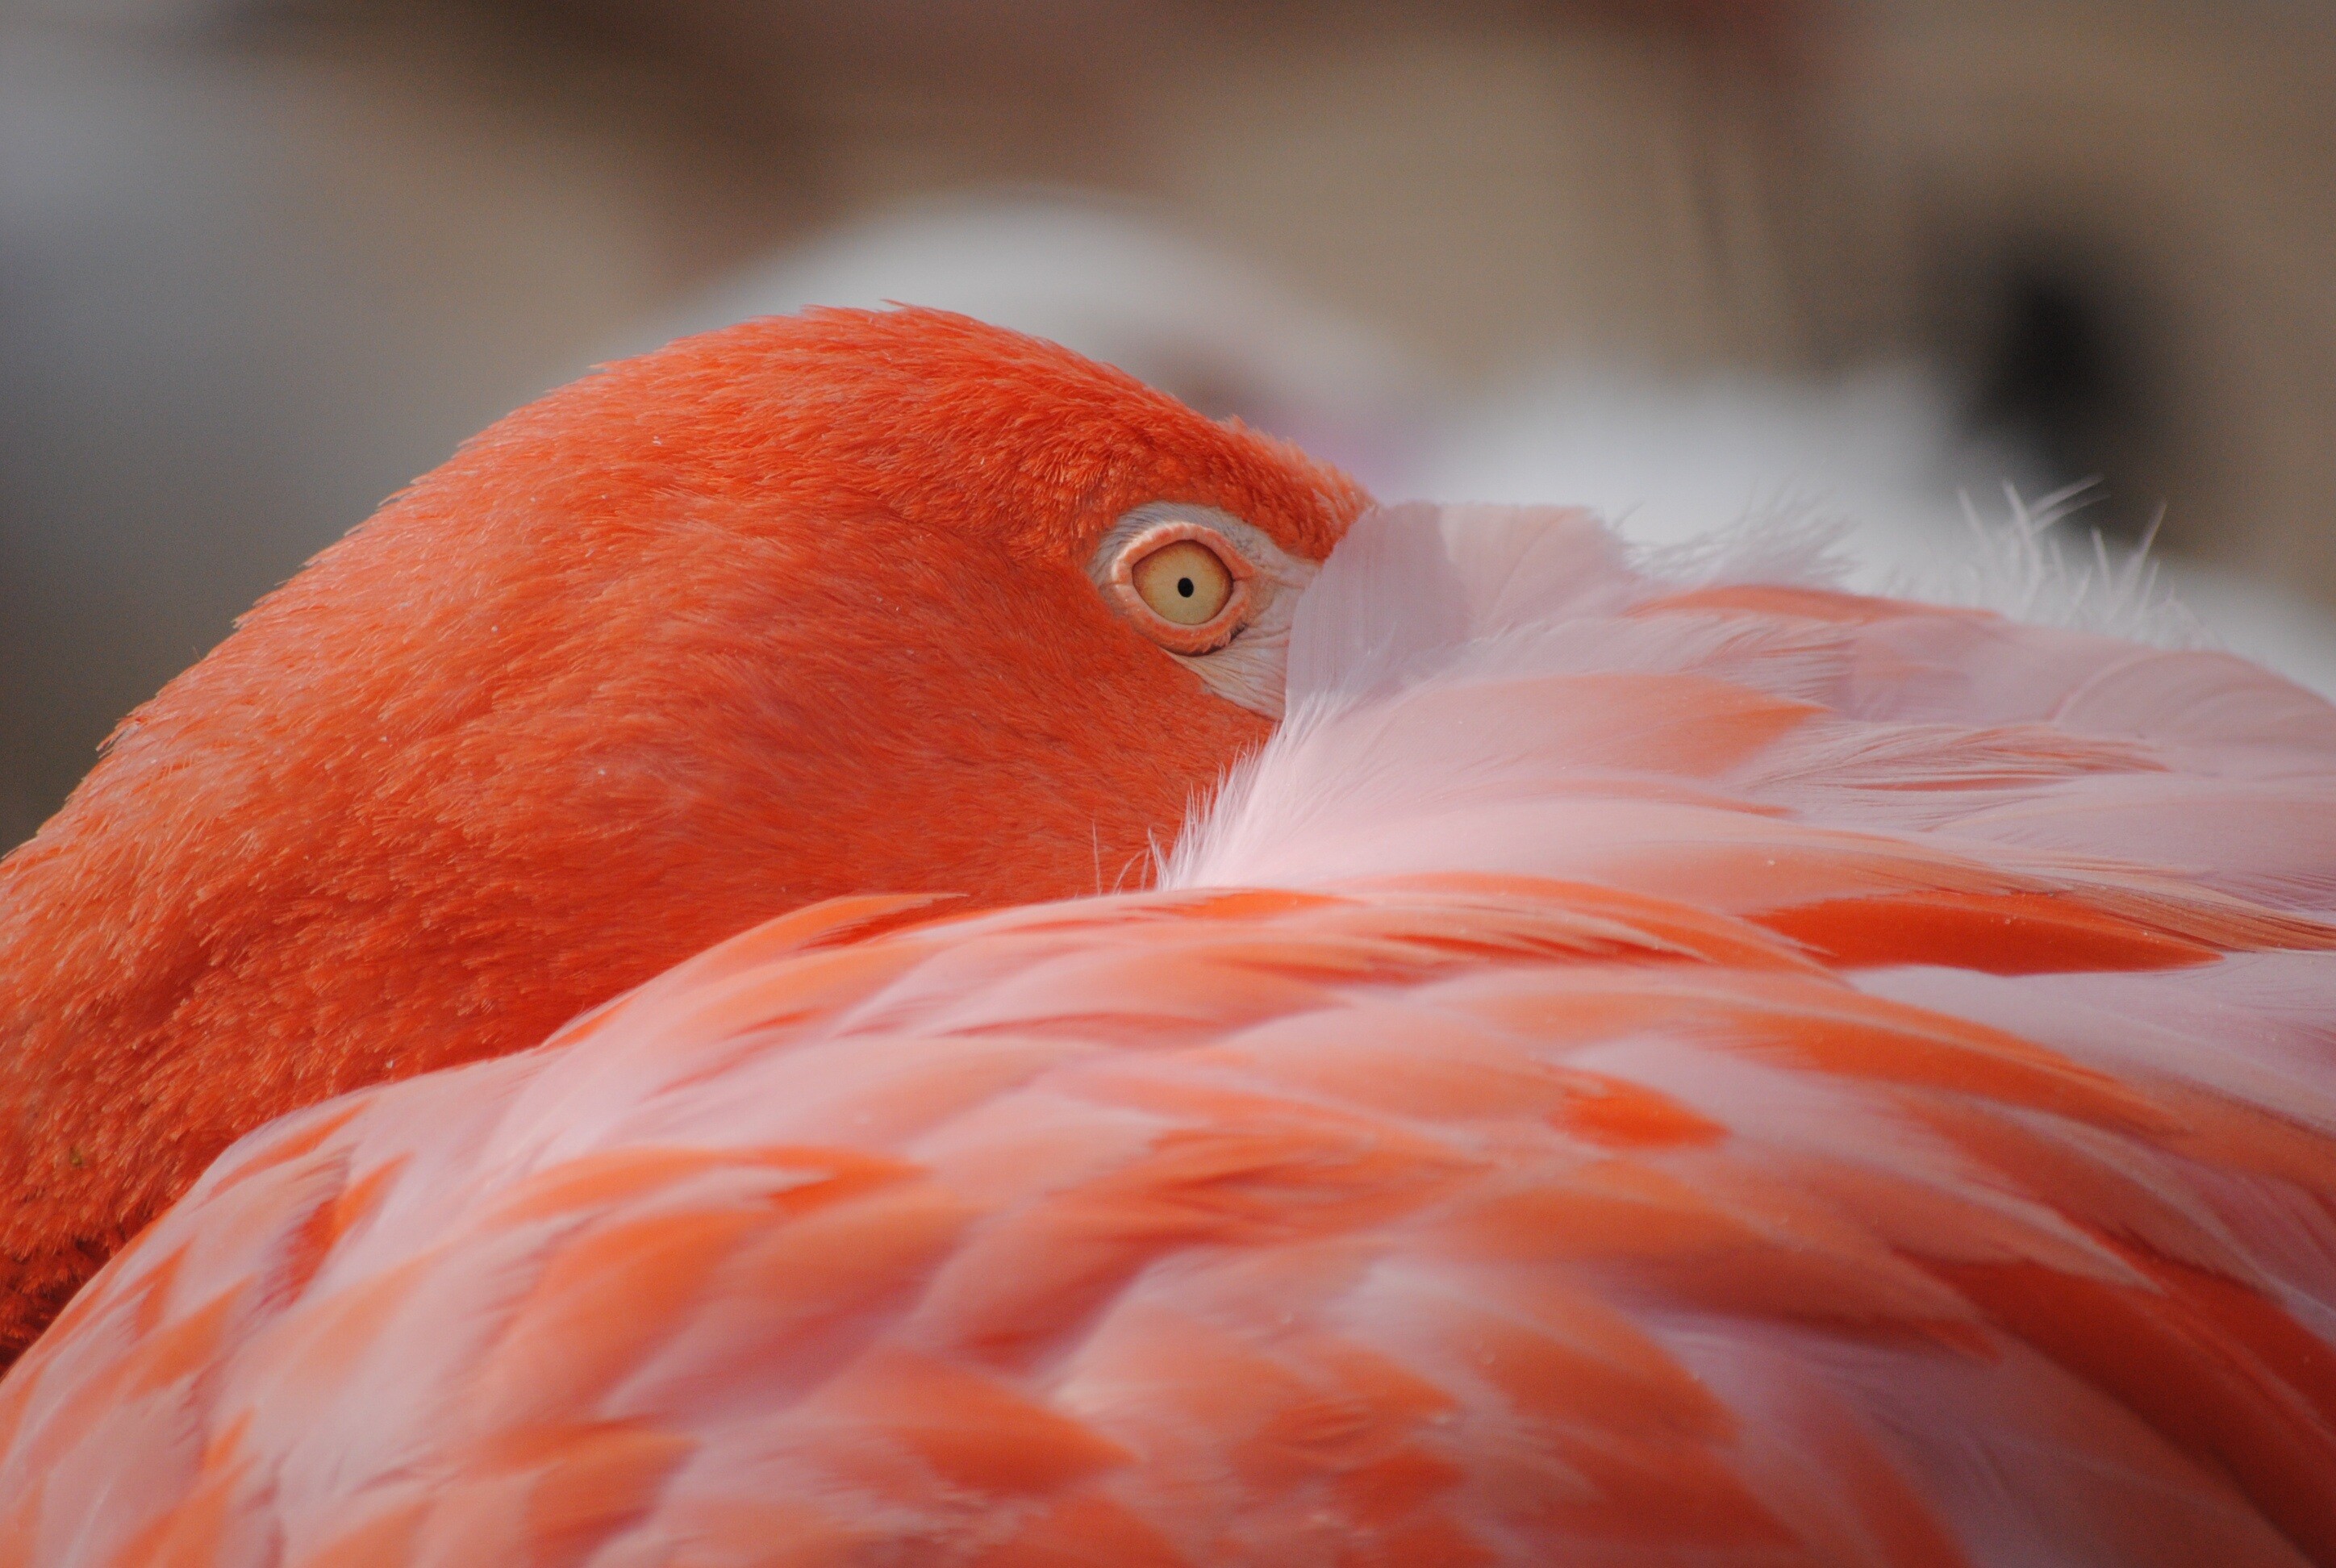 Flamingo: Large birds with long necks, sticklike legs and pink or reddish feathers. 2900x1950 HD Wallpaper.